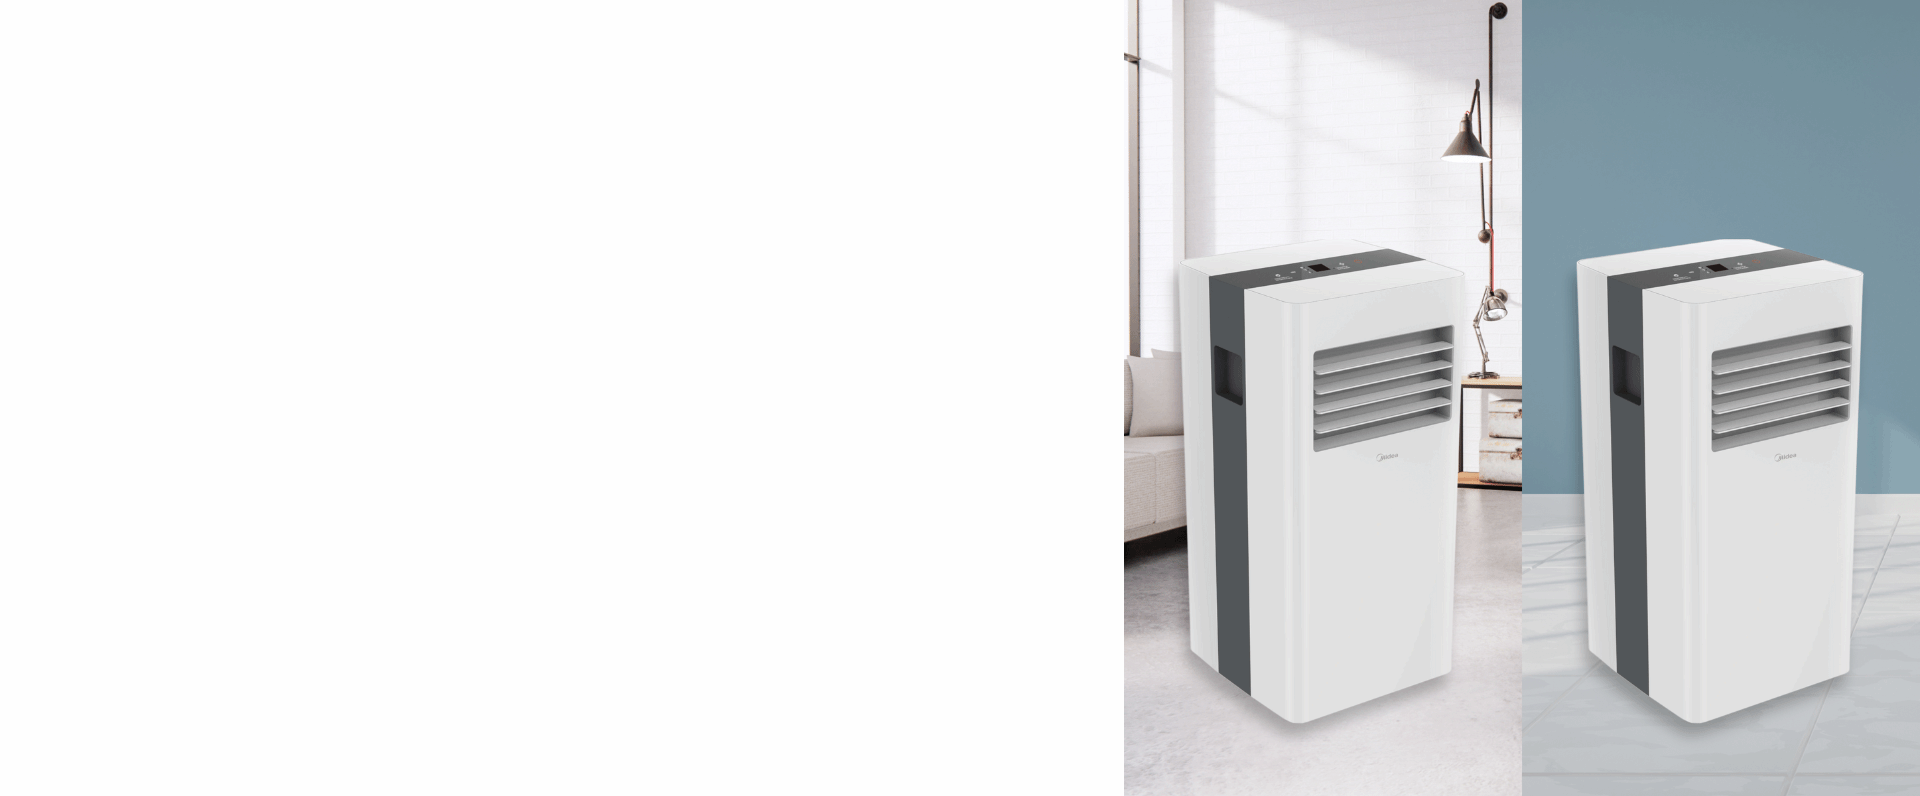 MAP07R1WWT by Midea - 7,000 BTU ComfortSense 3-in-1 Portable Air Conditioner